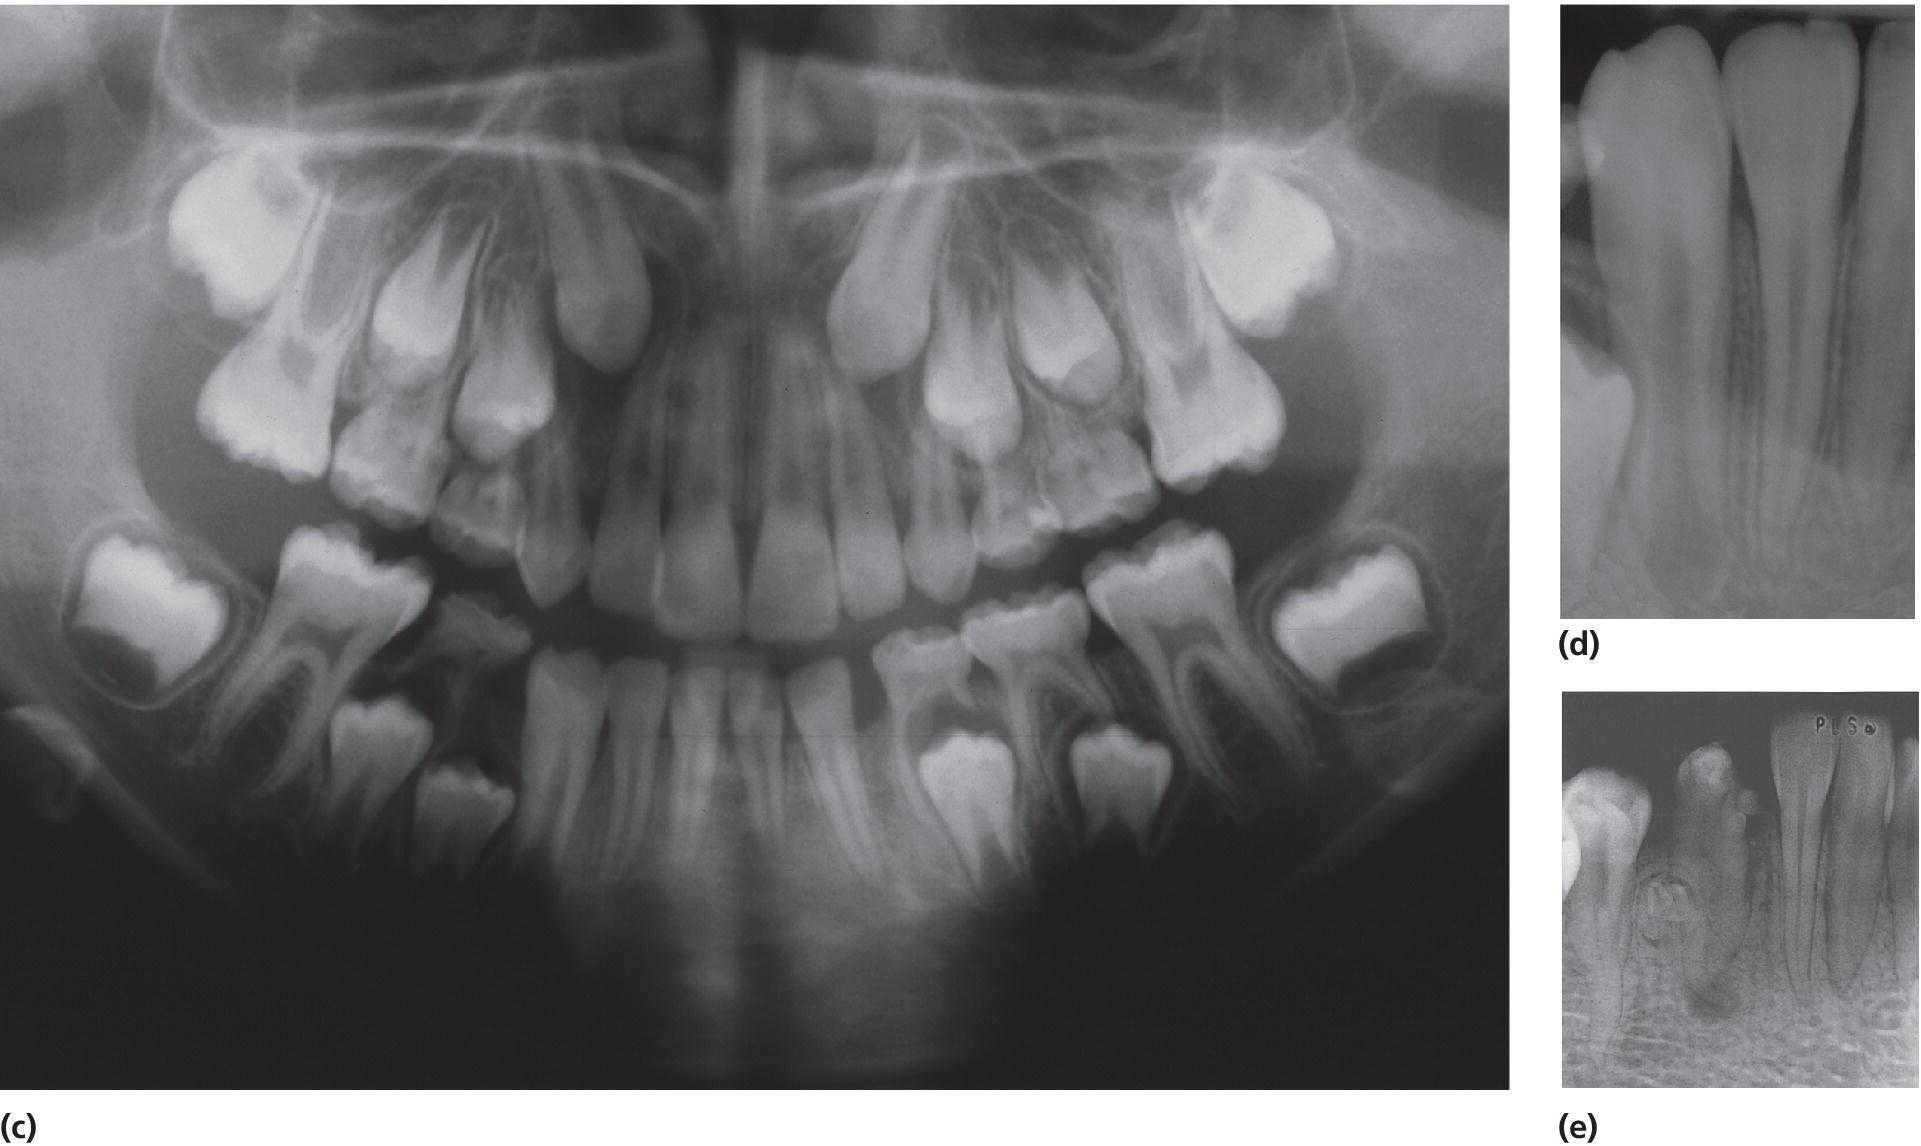 Left: Panoramic radiograph displaying no permanent left canine. Right: Radiographs of right lower canine with normal development (top) and of malformed crown and hypoplastic mandibular canine (bottom).